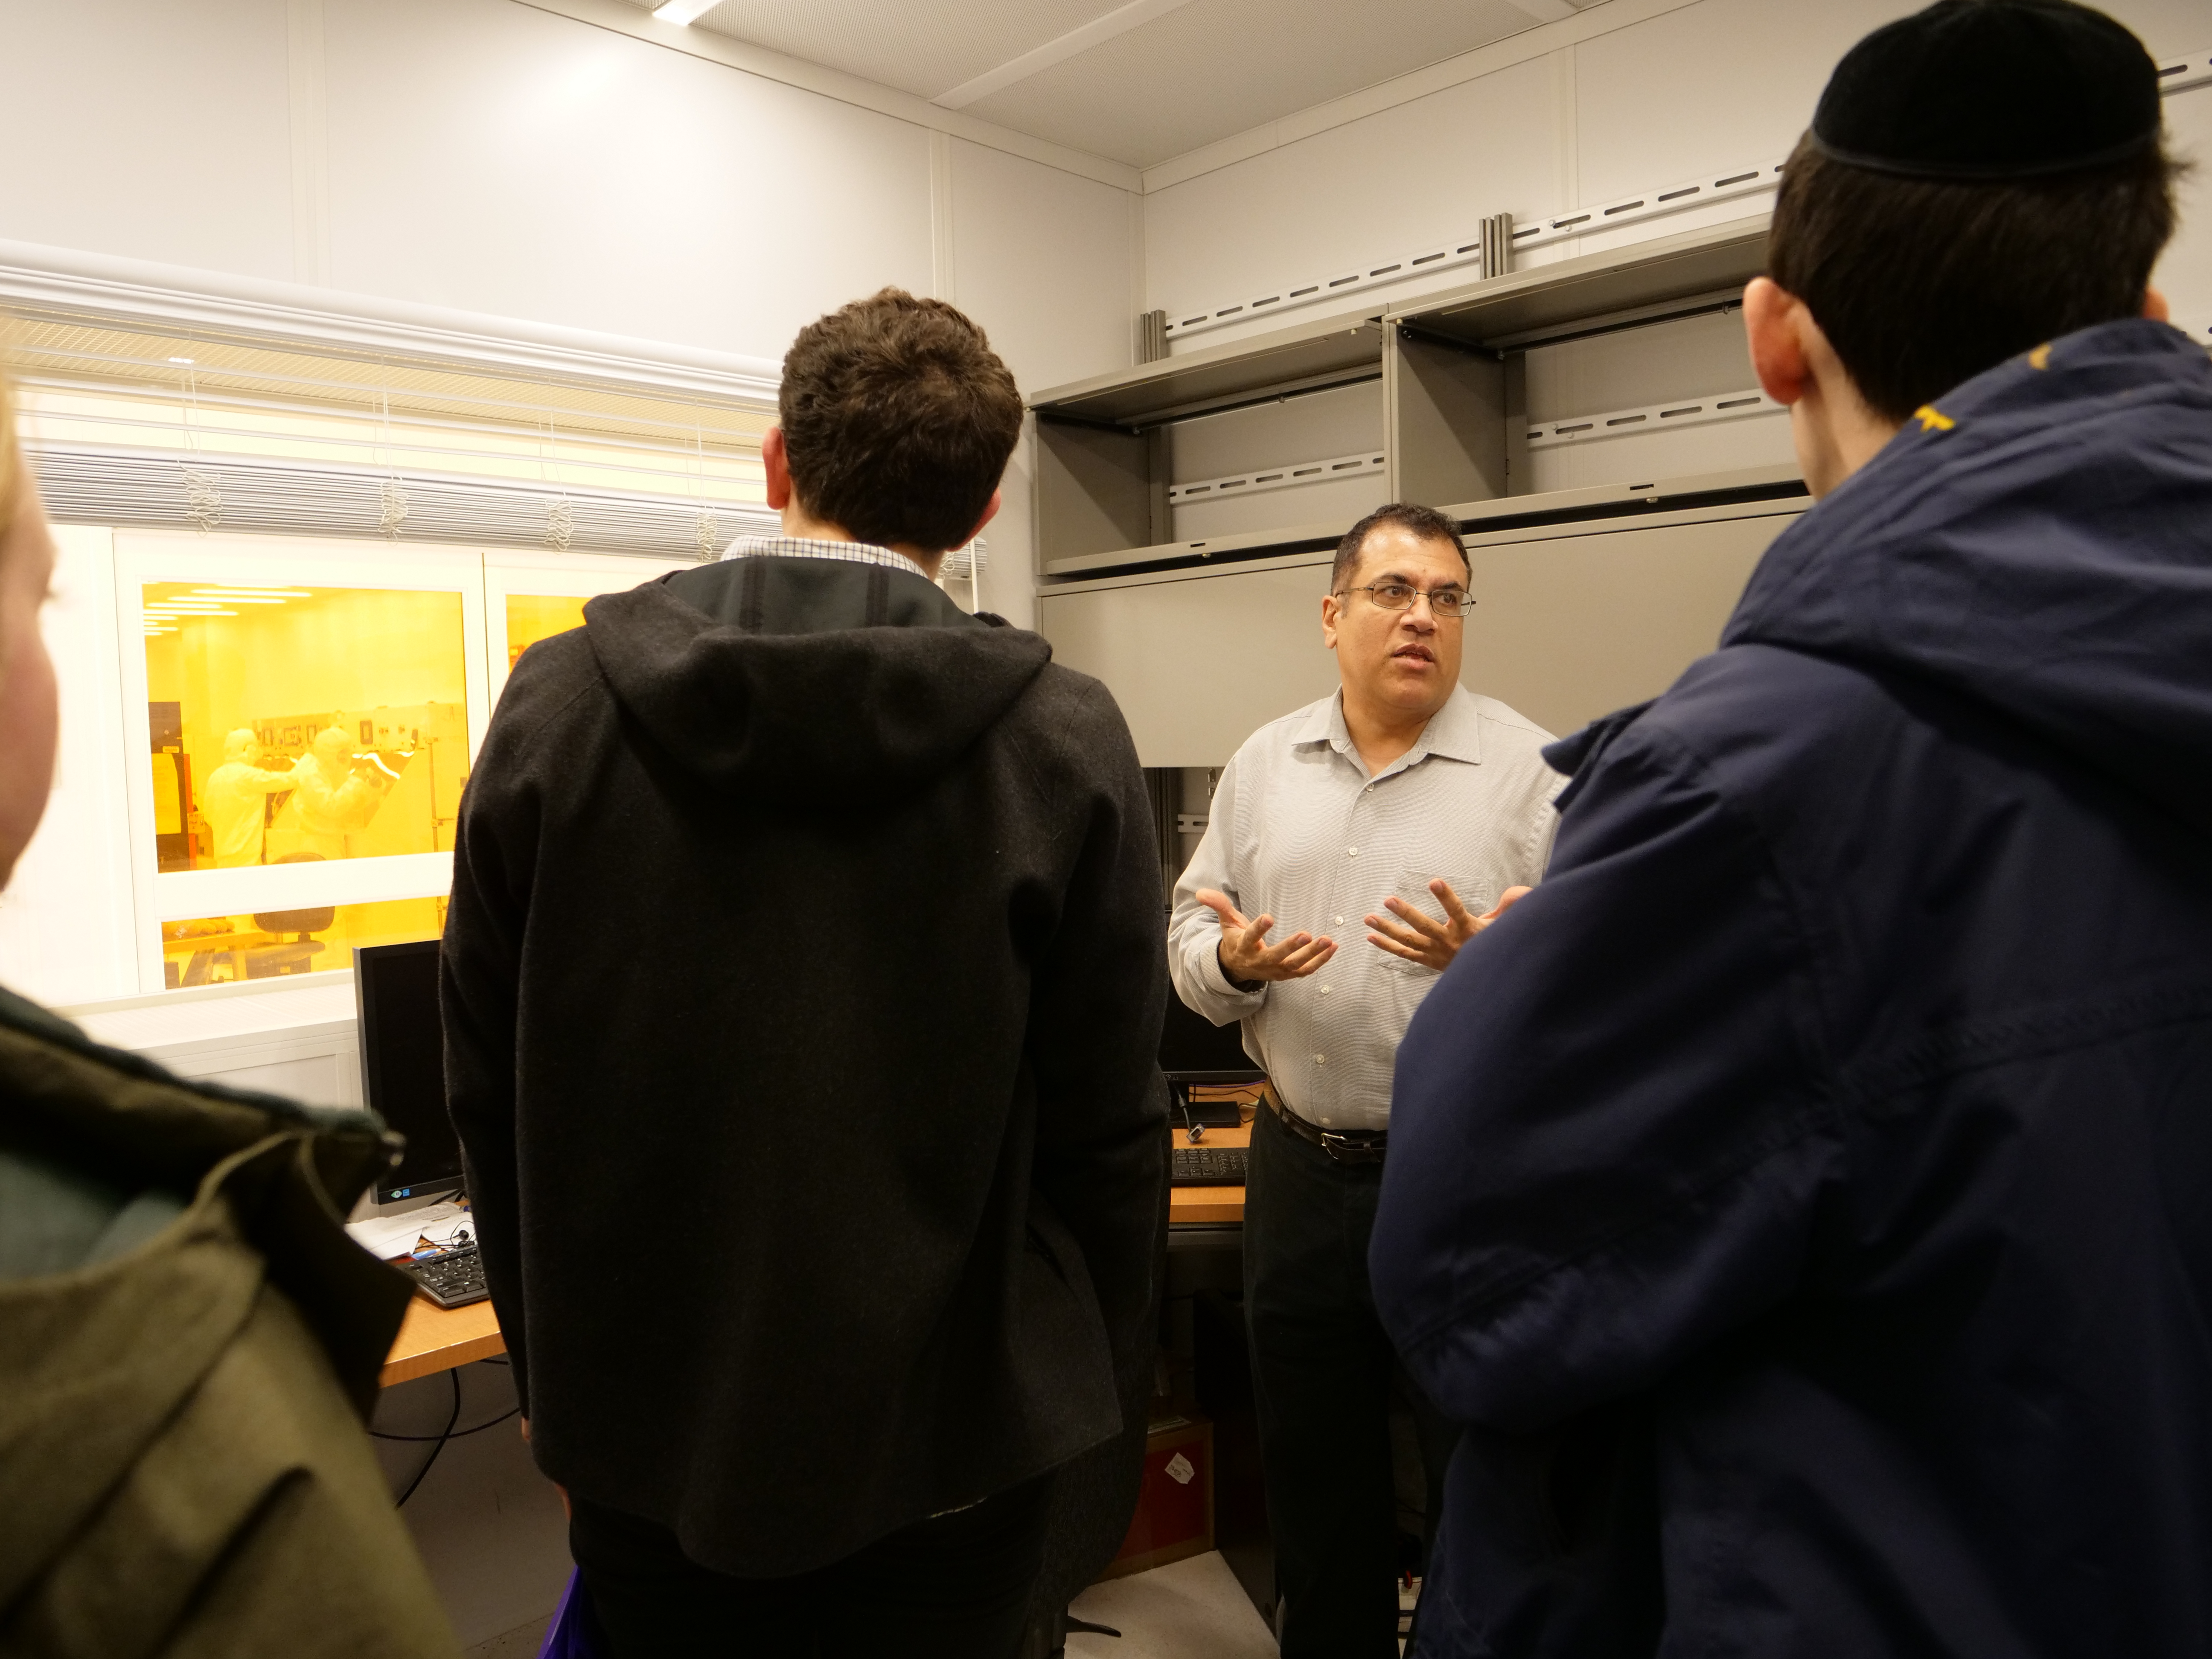 NUFAB facility manager Nasir Basit discusses the facility's capabilities in his office with prospective Applied Physics students.